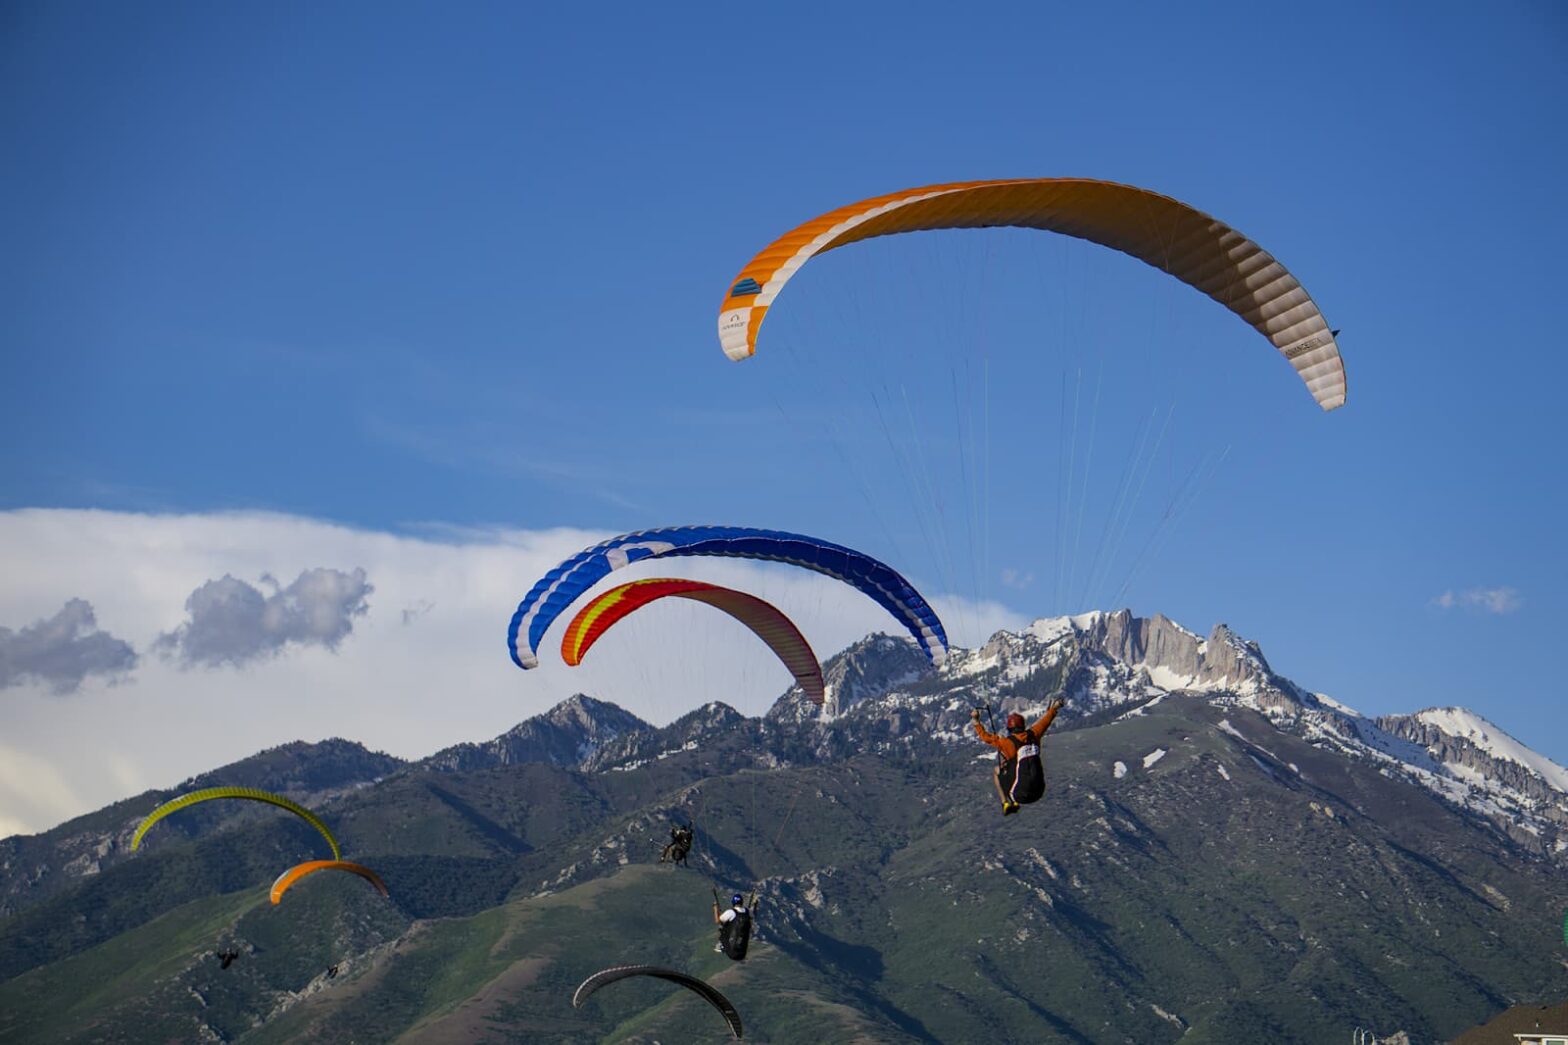 Three hang gliders in the air